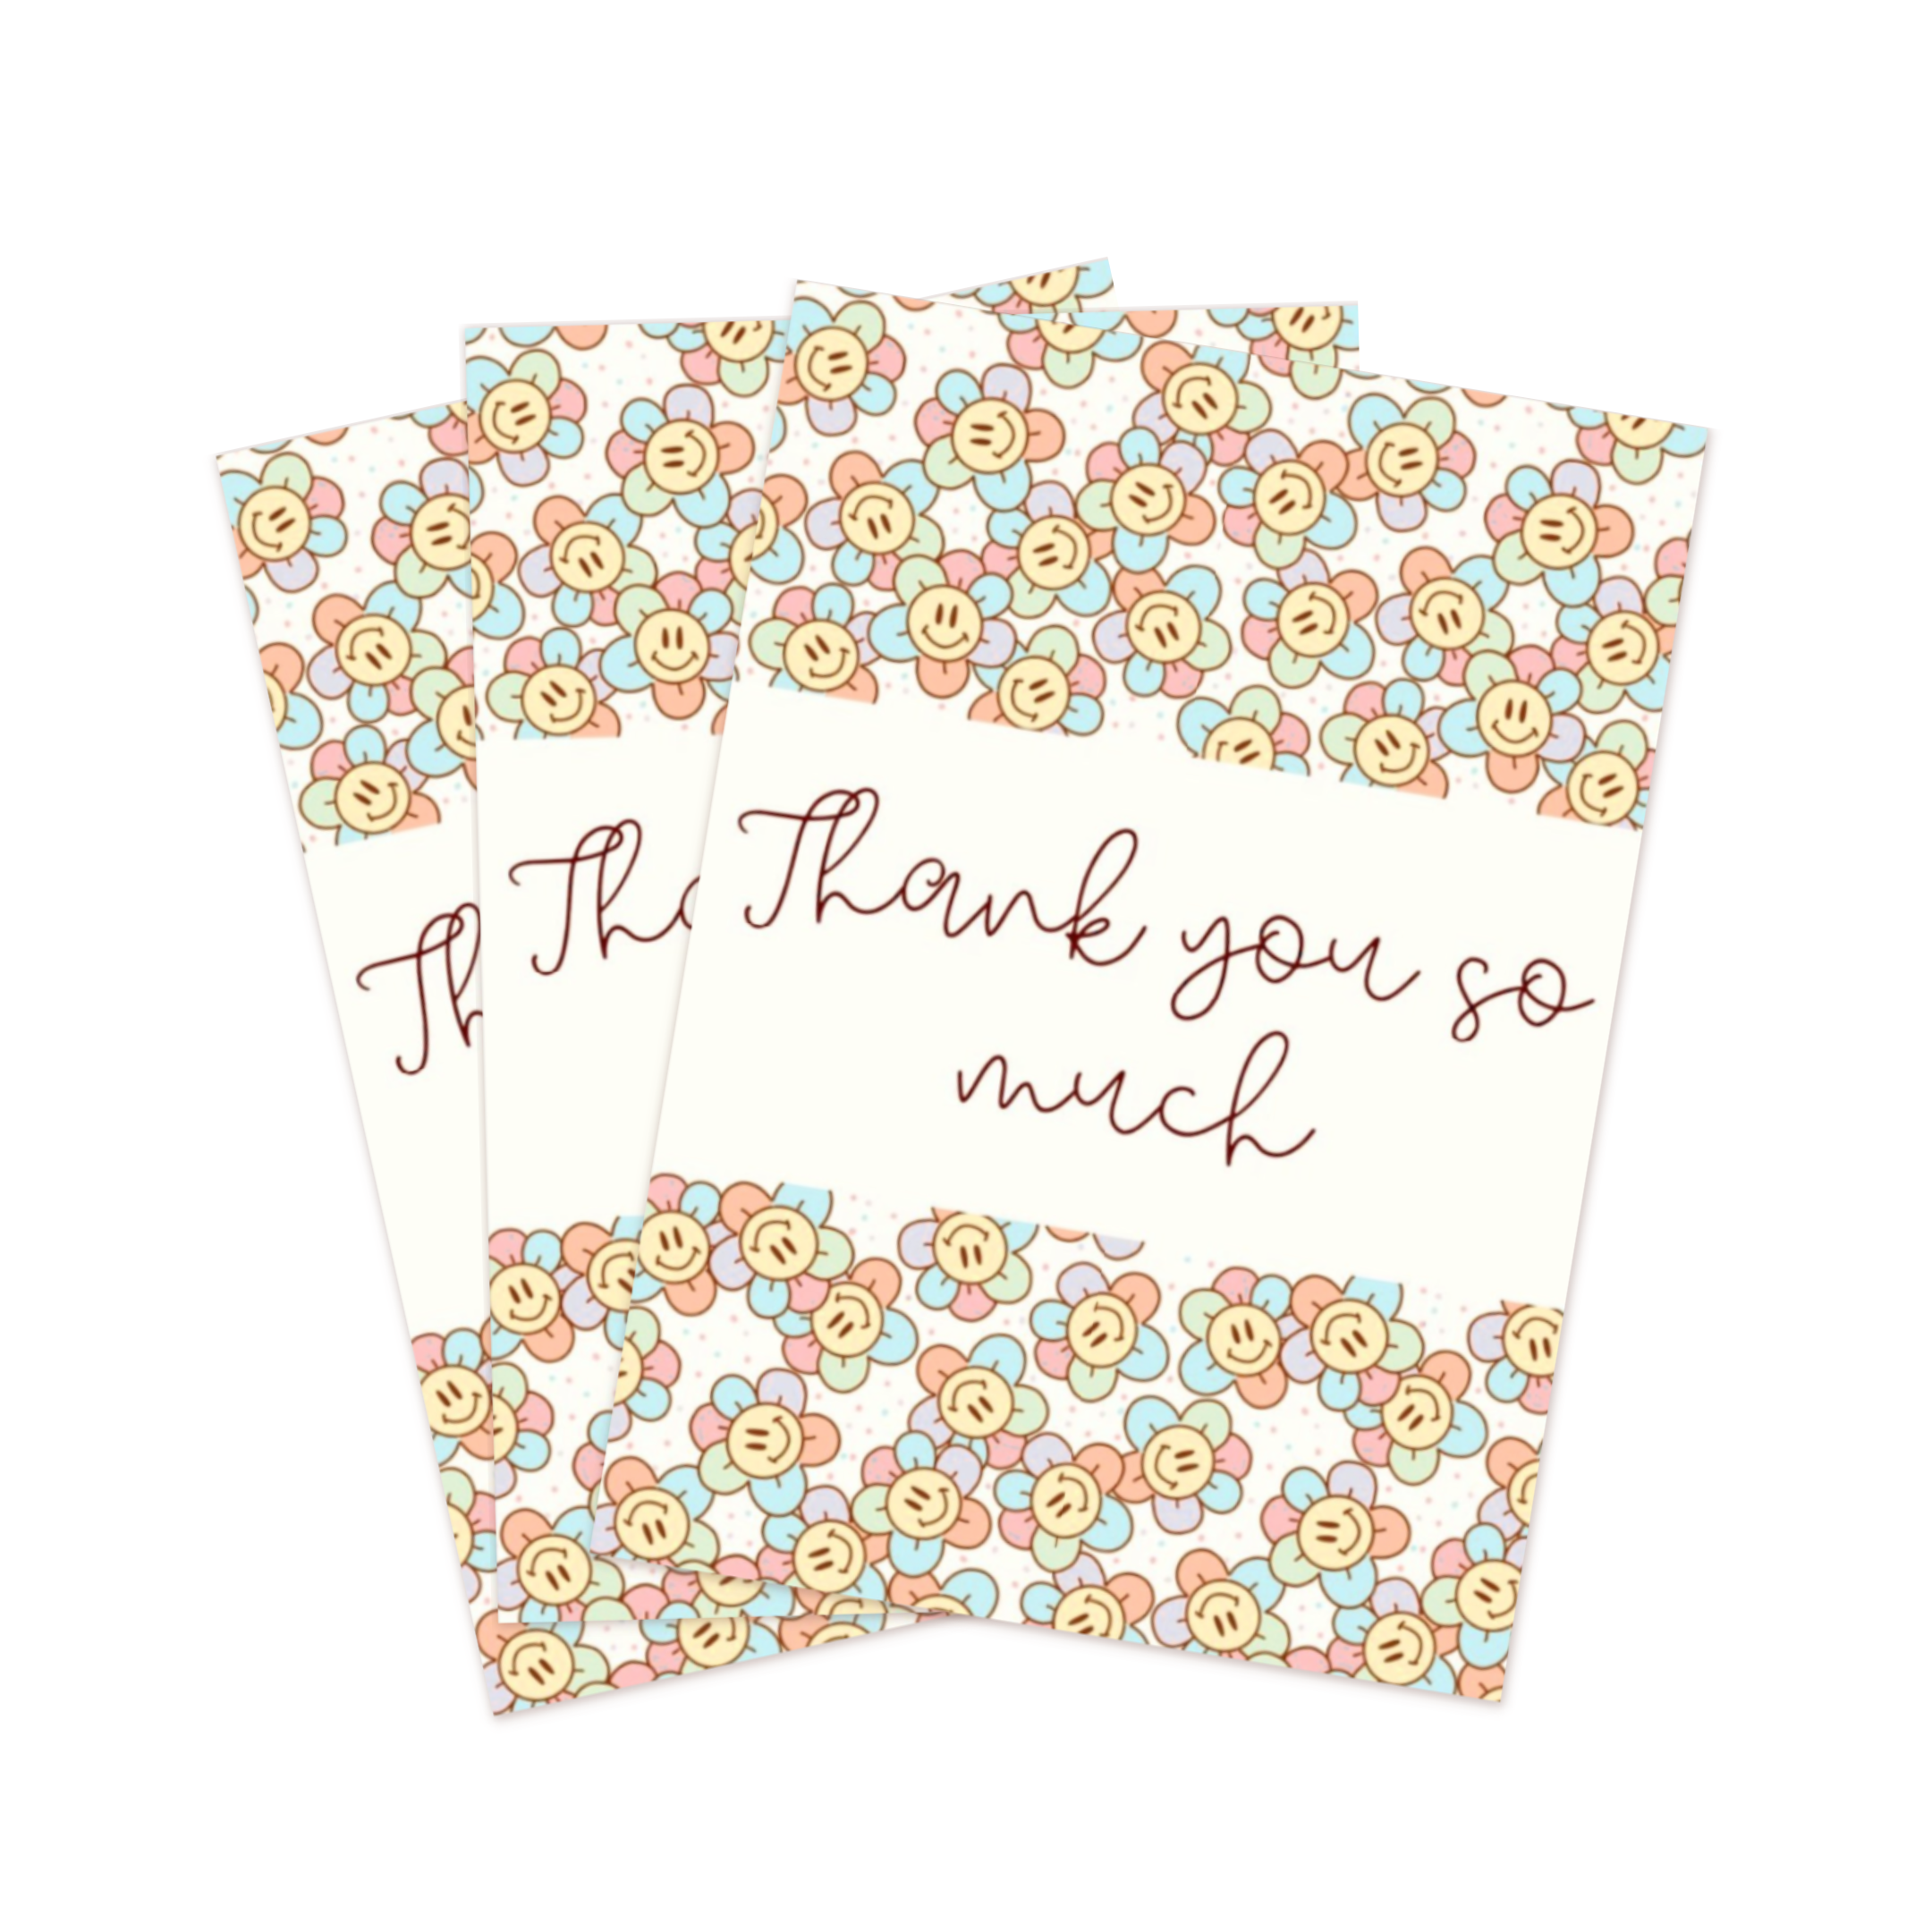 4x6" Package Insert Cards- Smiley Flowers